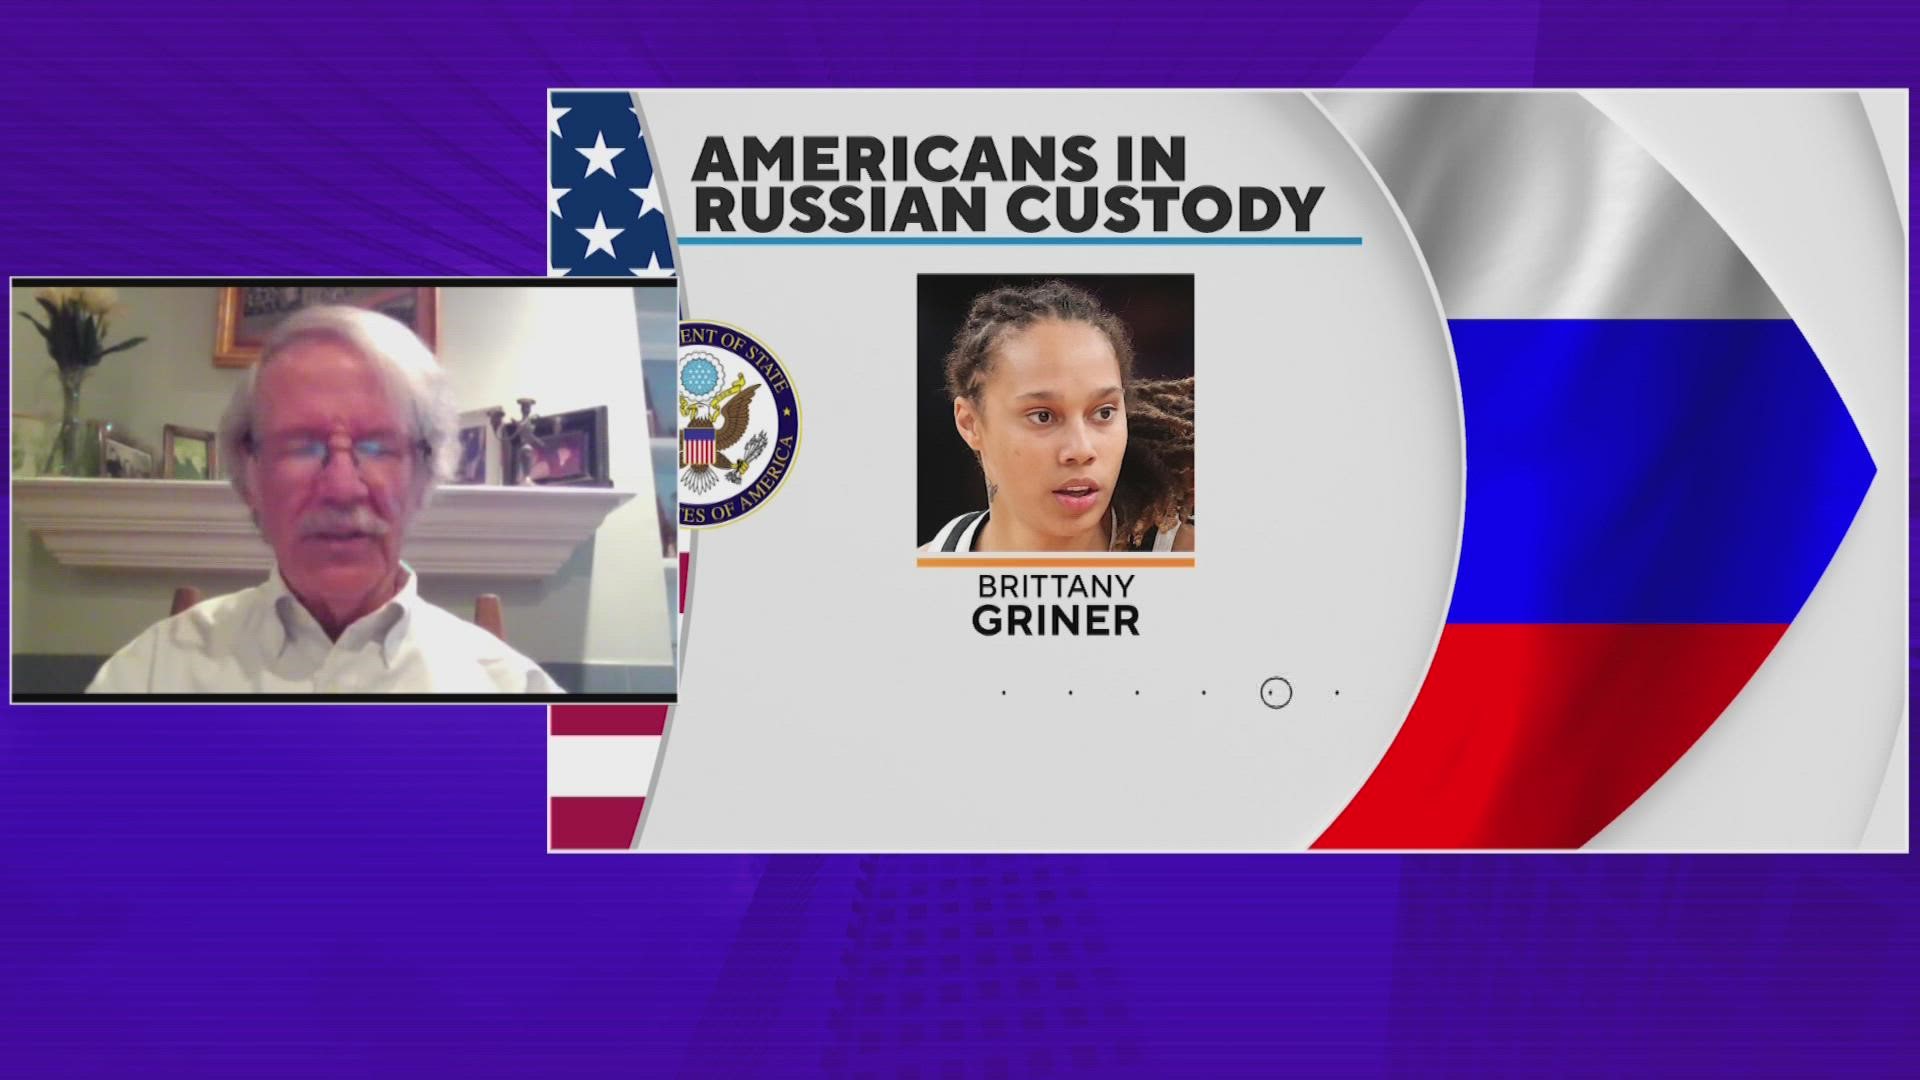 Richard Stoll, a professor with Rice University's Baker Institute for Public Policy, explains why the U.S. offering a deal to Russia to free Brittney Griner is rare.